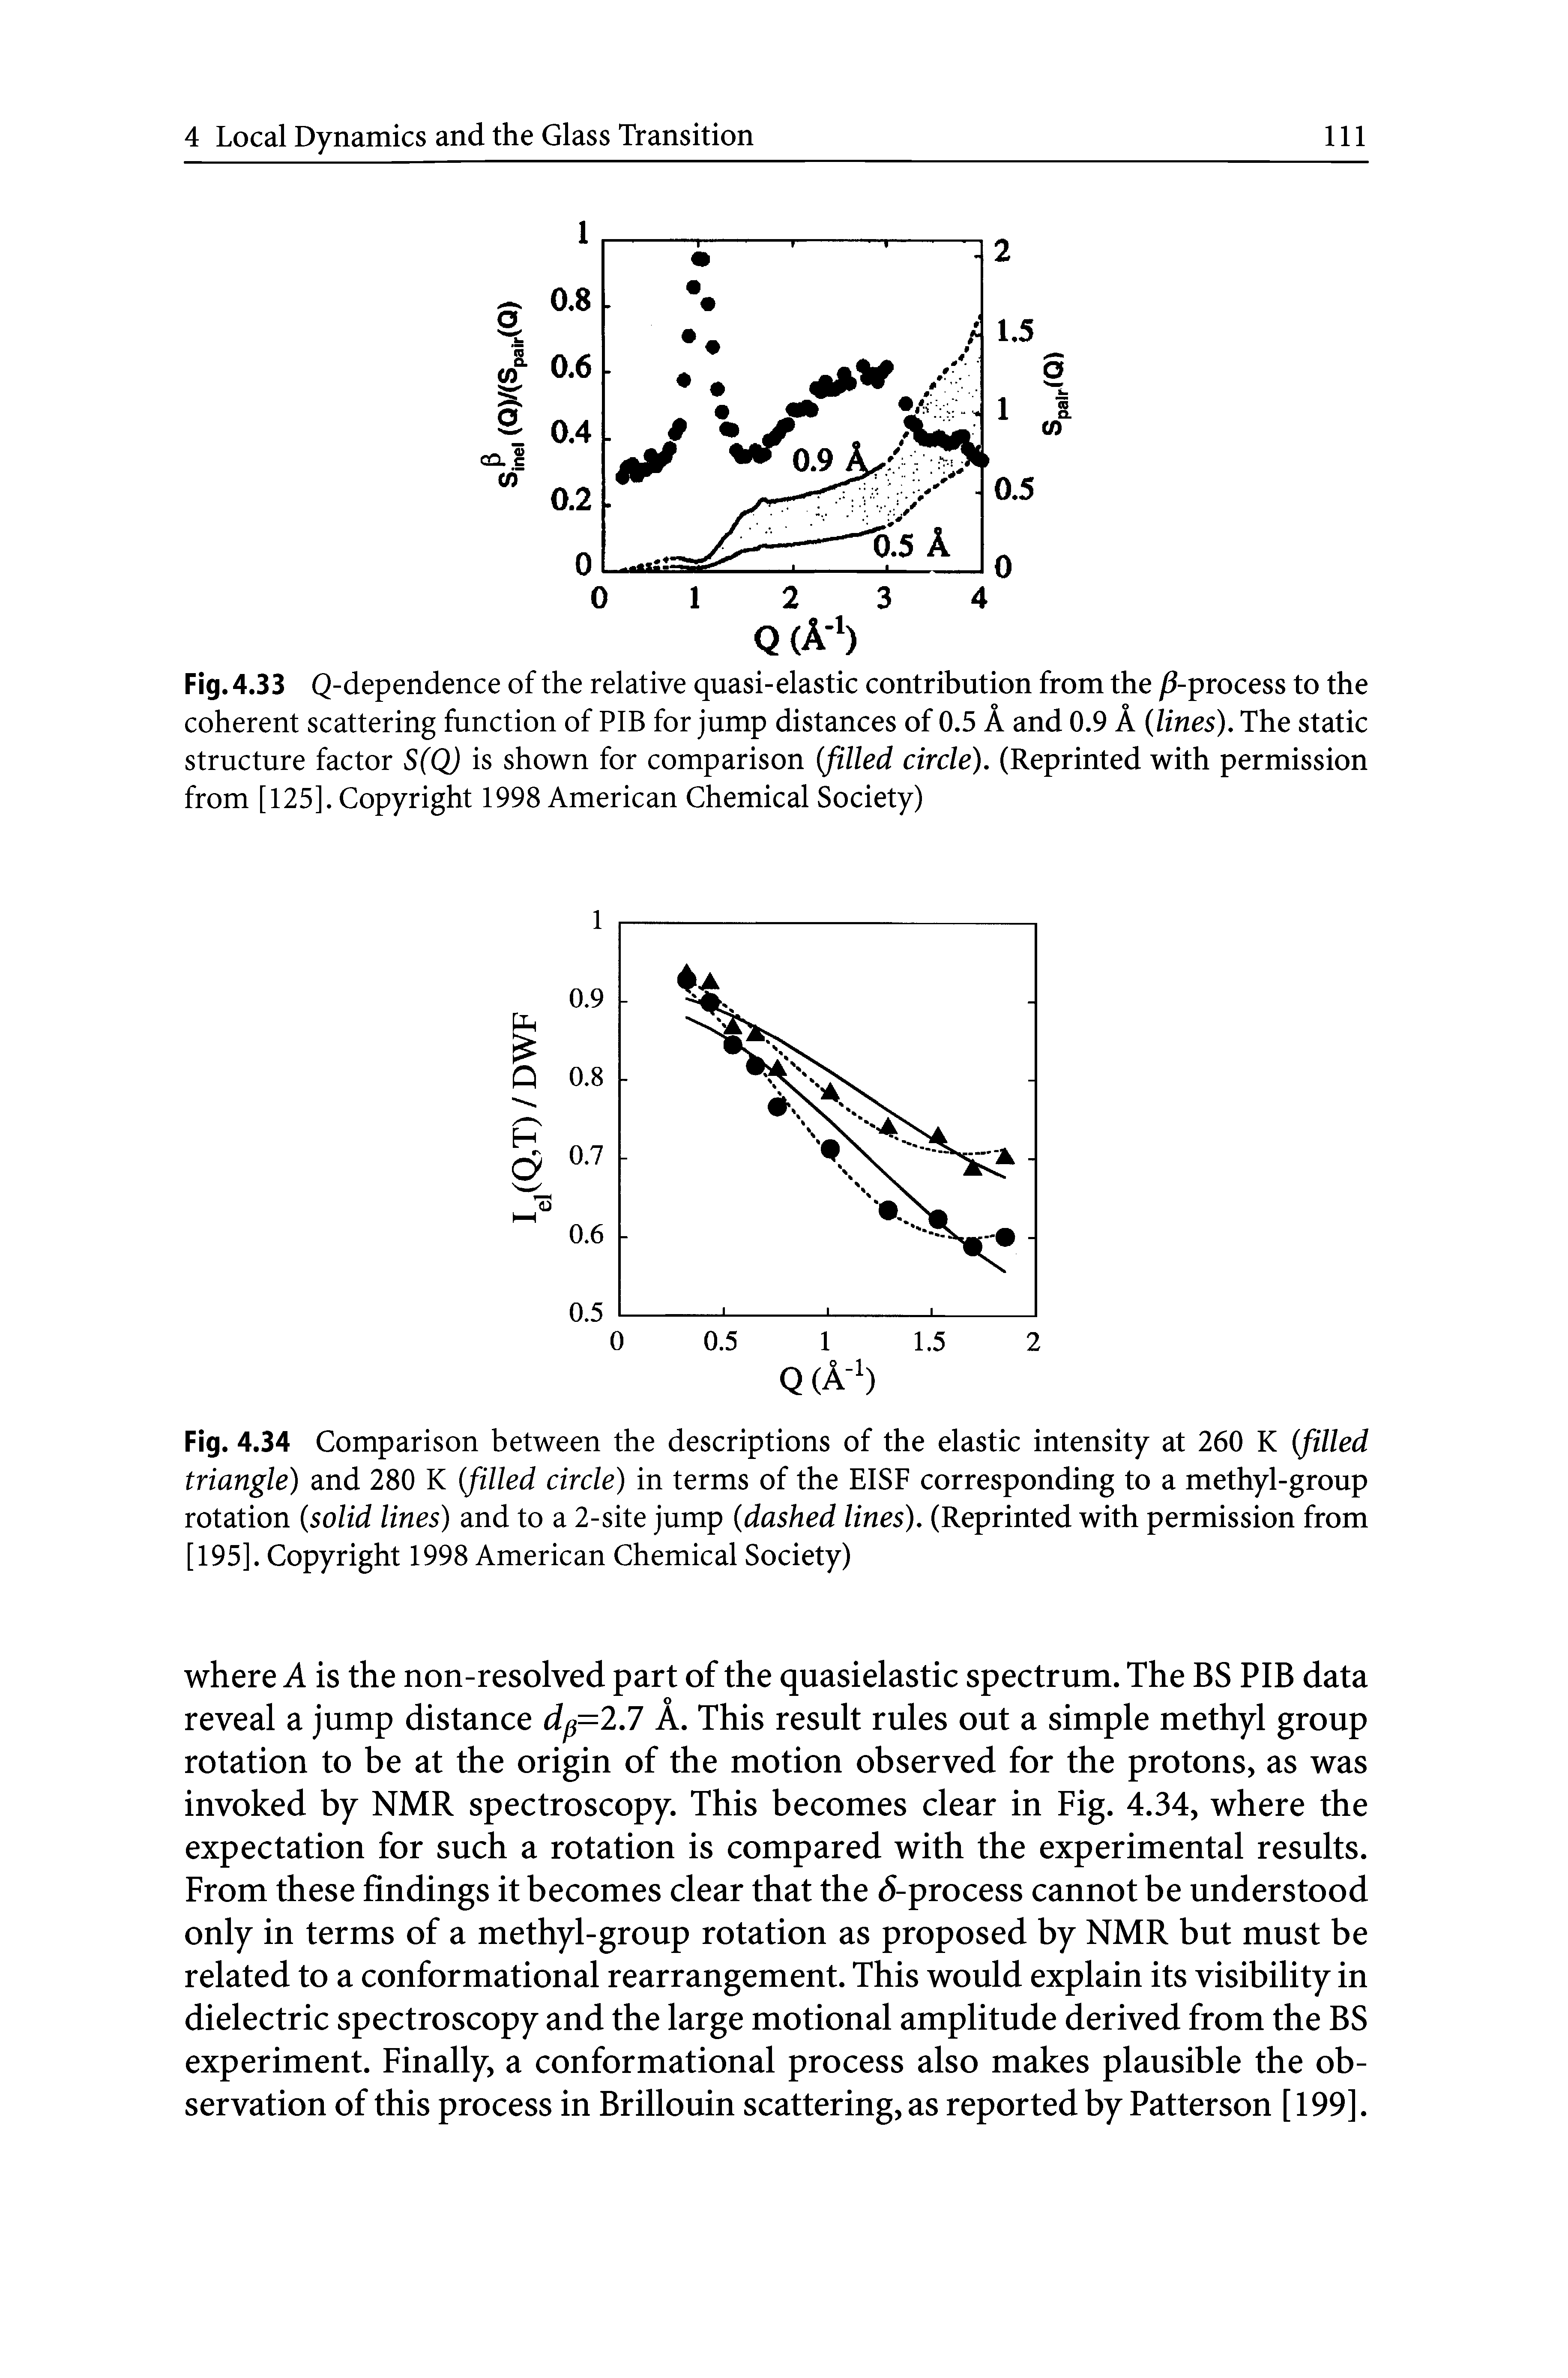 Fig. 4.34 Comparison between the descriptions of the elastic intensity at 260 K (filled triangle) and 280 K filled circle) in terms of the EISF corresponding to a methyl-group rotation (solid lines) and to a 2-site jump (dashed lines), (Reprinted with permission from [195]. Copyright 1998 American Chemical Society)...